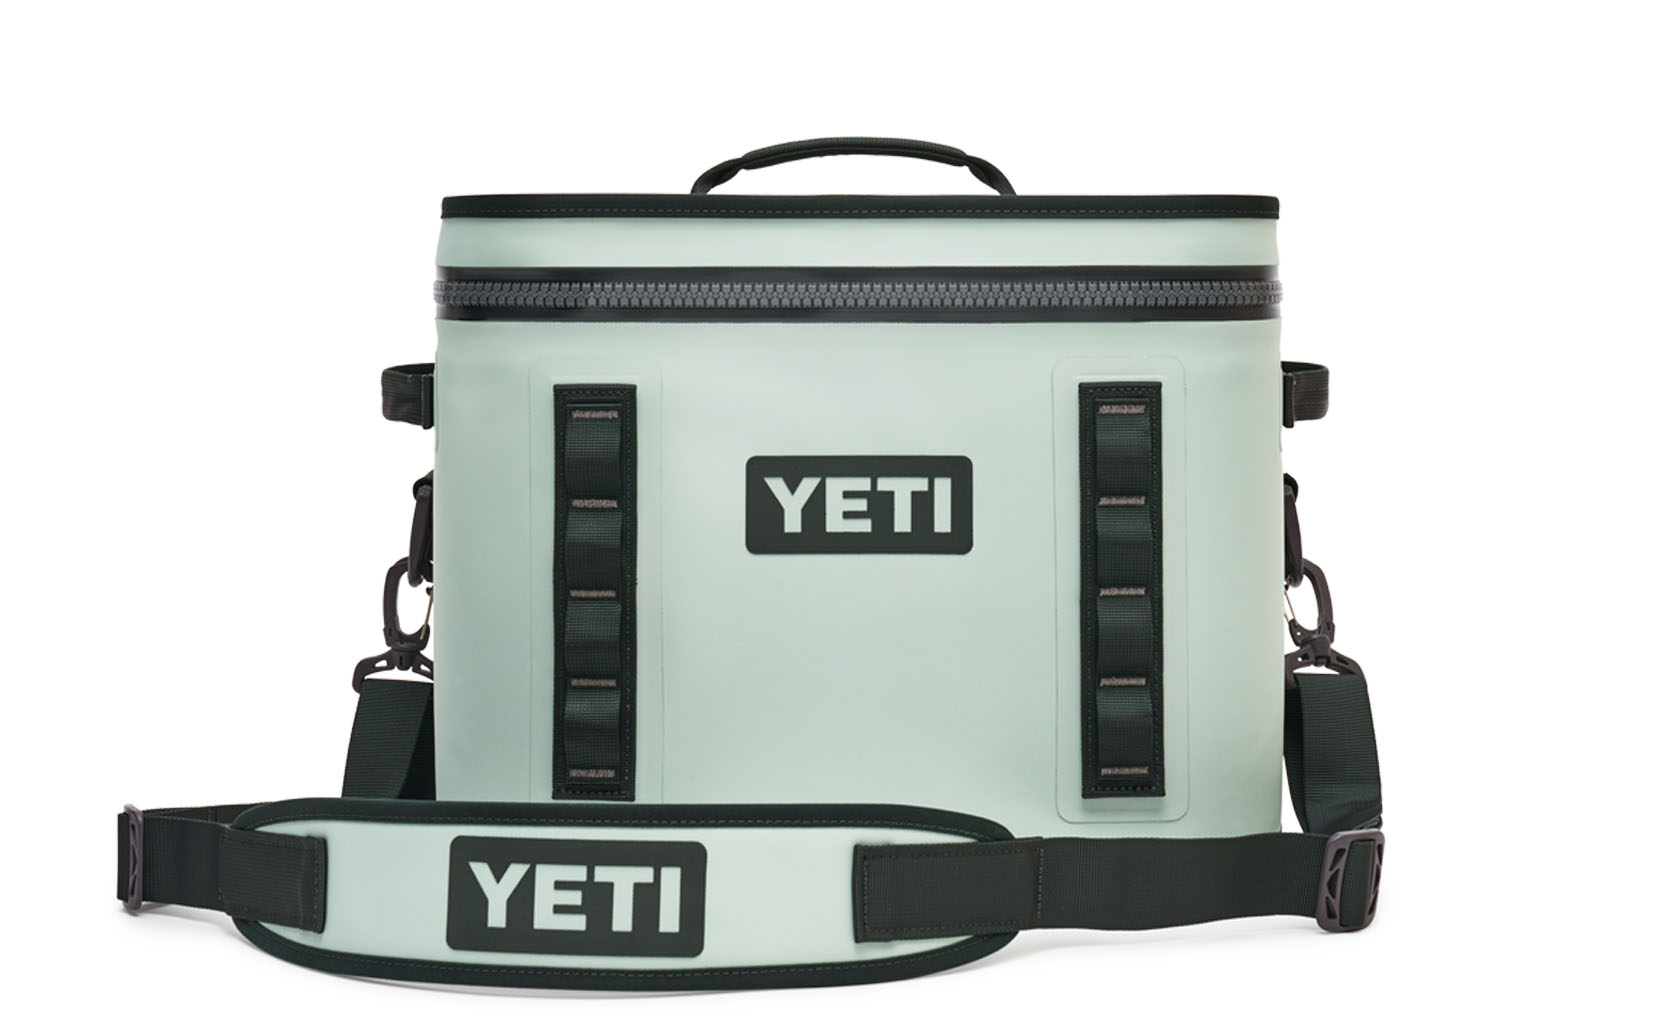 https://www.yeti.com/on/demandware.static/-/Sites-masterCatalog_Yeti/default/dw4f7d9ac7/images/pdp-Hopper/Hopper-Flip-18/Sagebrush/200181-Flip-18-Sagebrush-Front-with-Strap-Clipped-2400x2400.jpg